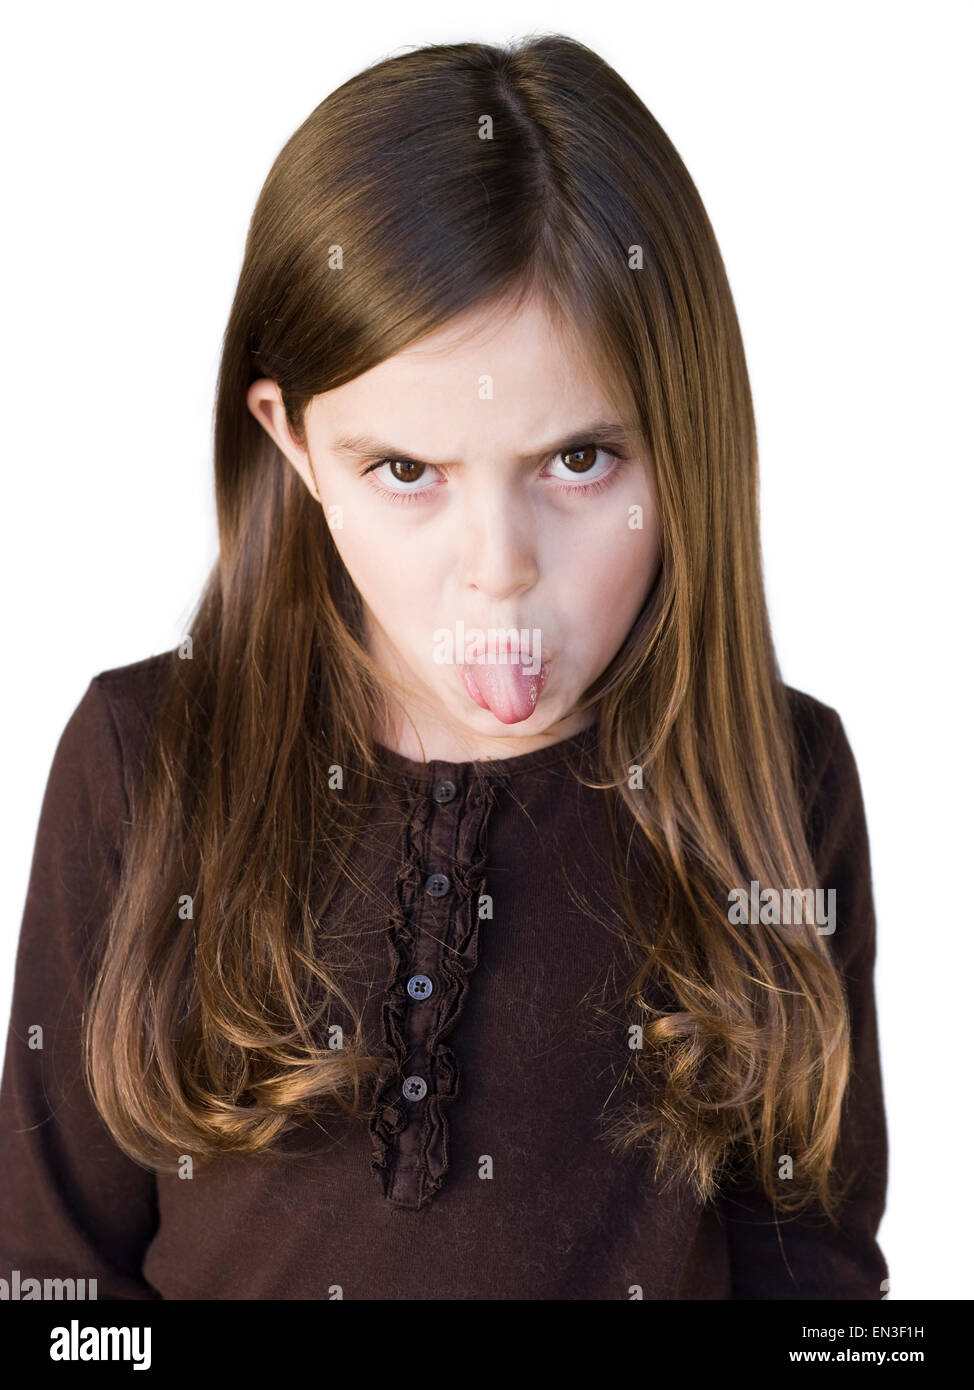 Girl (8-9) sticking out tongue, studio shot Banque D'Images